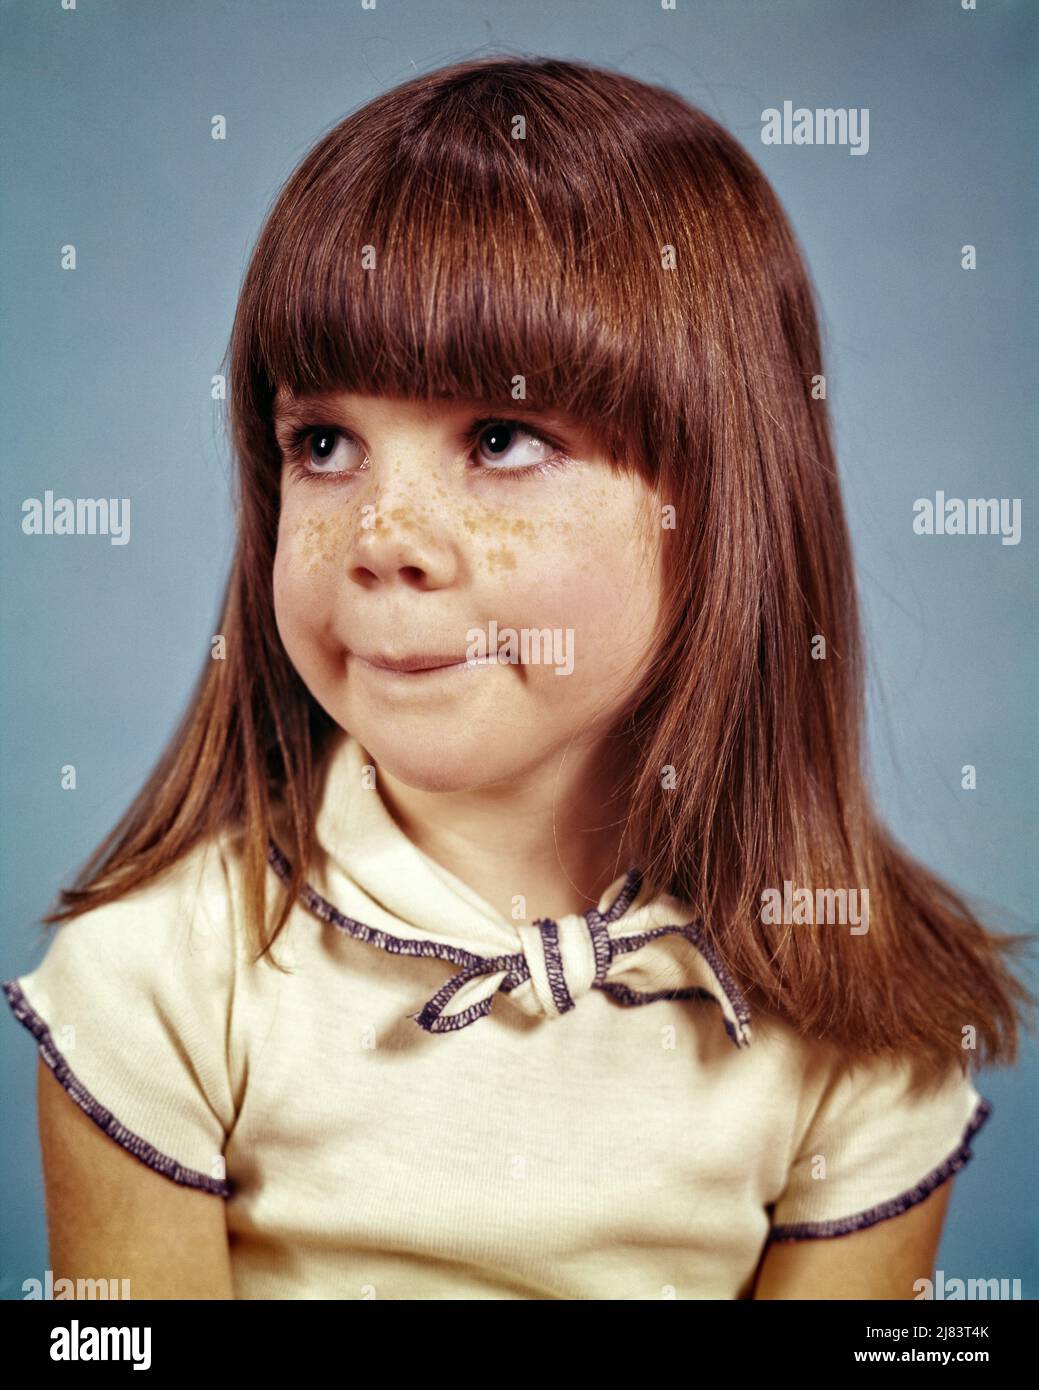 1970s BRUNETTE LITTLE GIRL FRECKLES ON NOSE LONG HAIR BANGS WITH GOOFY FACIAL EXPRESSION LOOKING UP AND TO THE SIDE SILLY GRIN - kj7426 HAR001 HARS EXPRESSIONS BRUNETTE HUMOROUS HEAD AND SHOULDERS AND COMICAL UP COMEDY GOOFY PLEASANT AGREEABLE CHARMING GRIN JUVENILES LOOKING UP LOVABLE PLEASING ADORABLE APPEALING BANGS CAUCASIAN ETHNICITY HAR001 INNOCENCE OLD FASHIONED Stock Photo